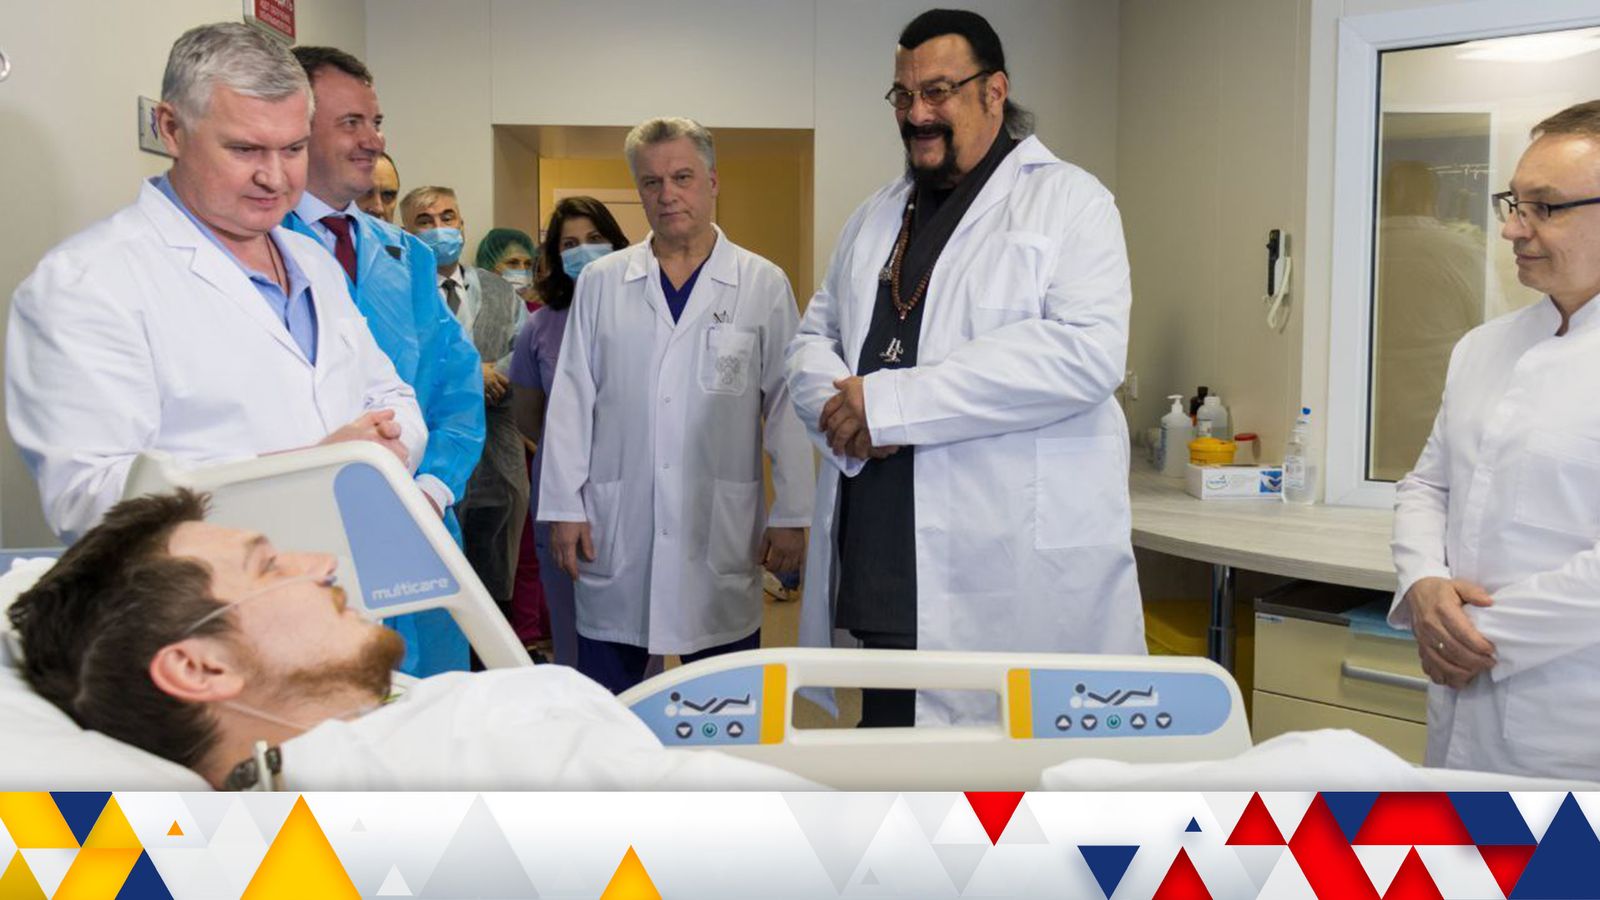 Actor Steven Seagal visits victims of Moscow attack, calls it a ‘terrible tragedy’ – Latest on Russia-Ukraine conflict | World News